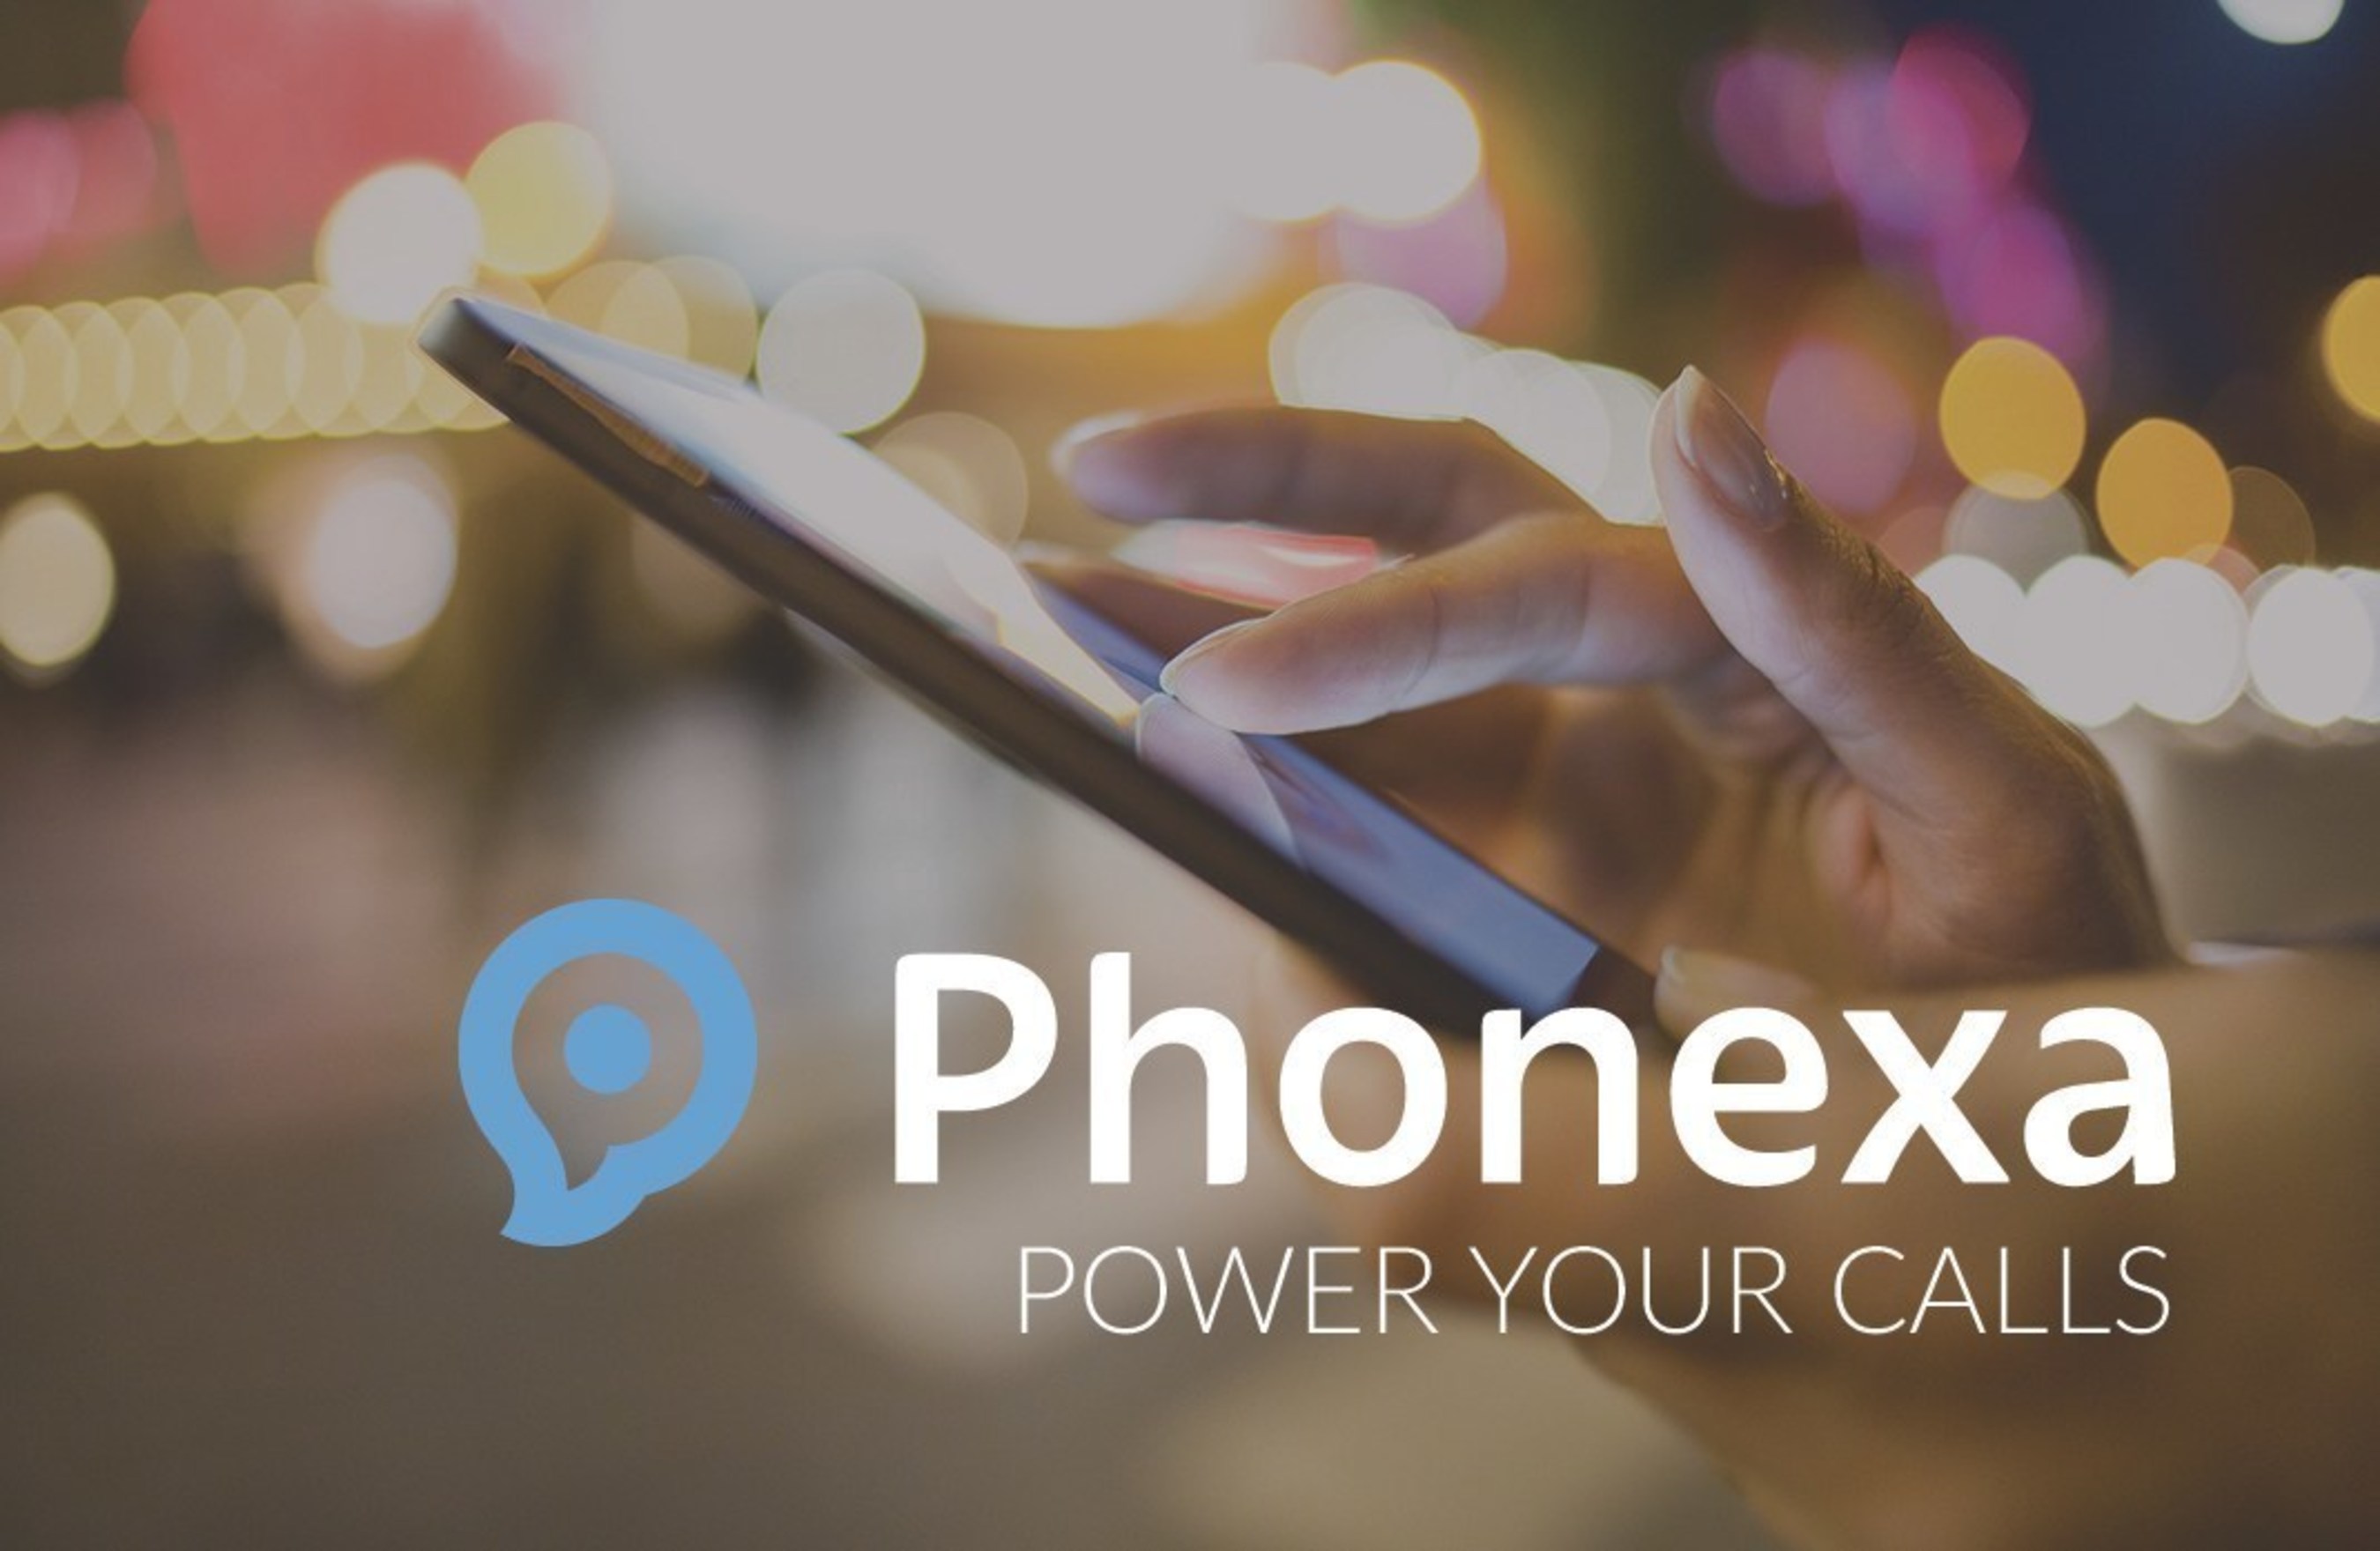 Phonexa is a call logic platform that gives you insight on your calls.